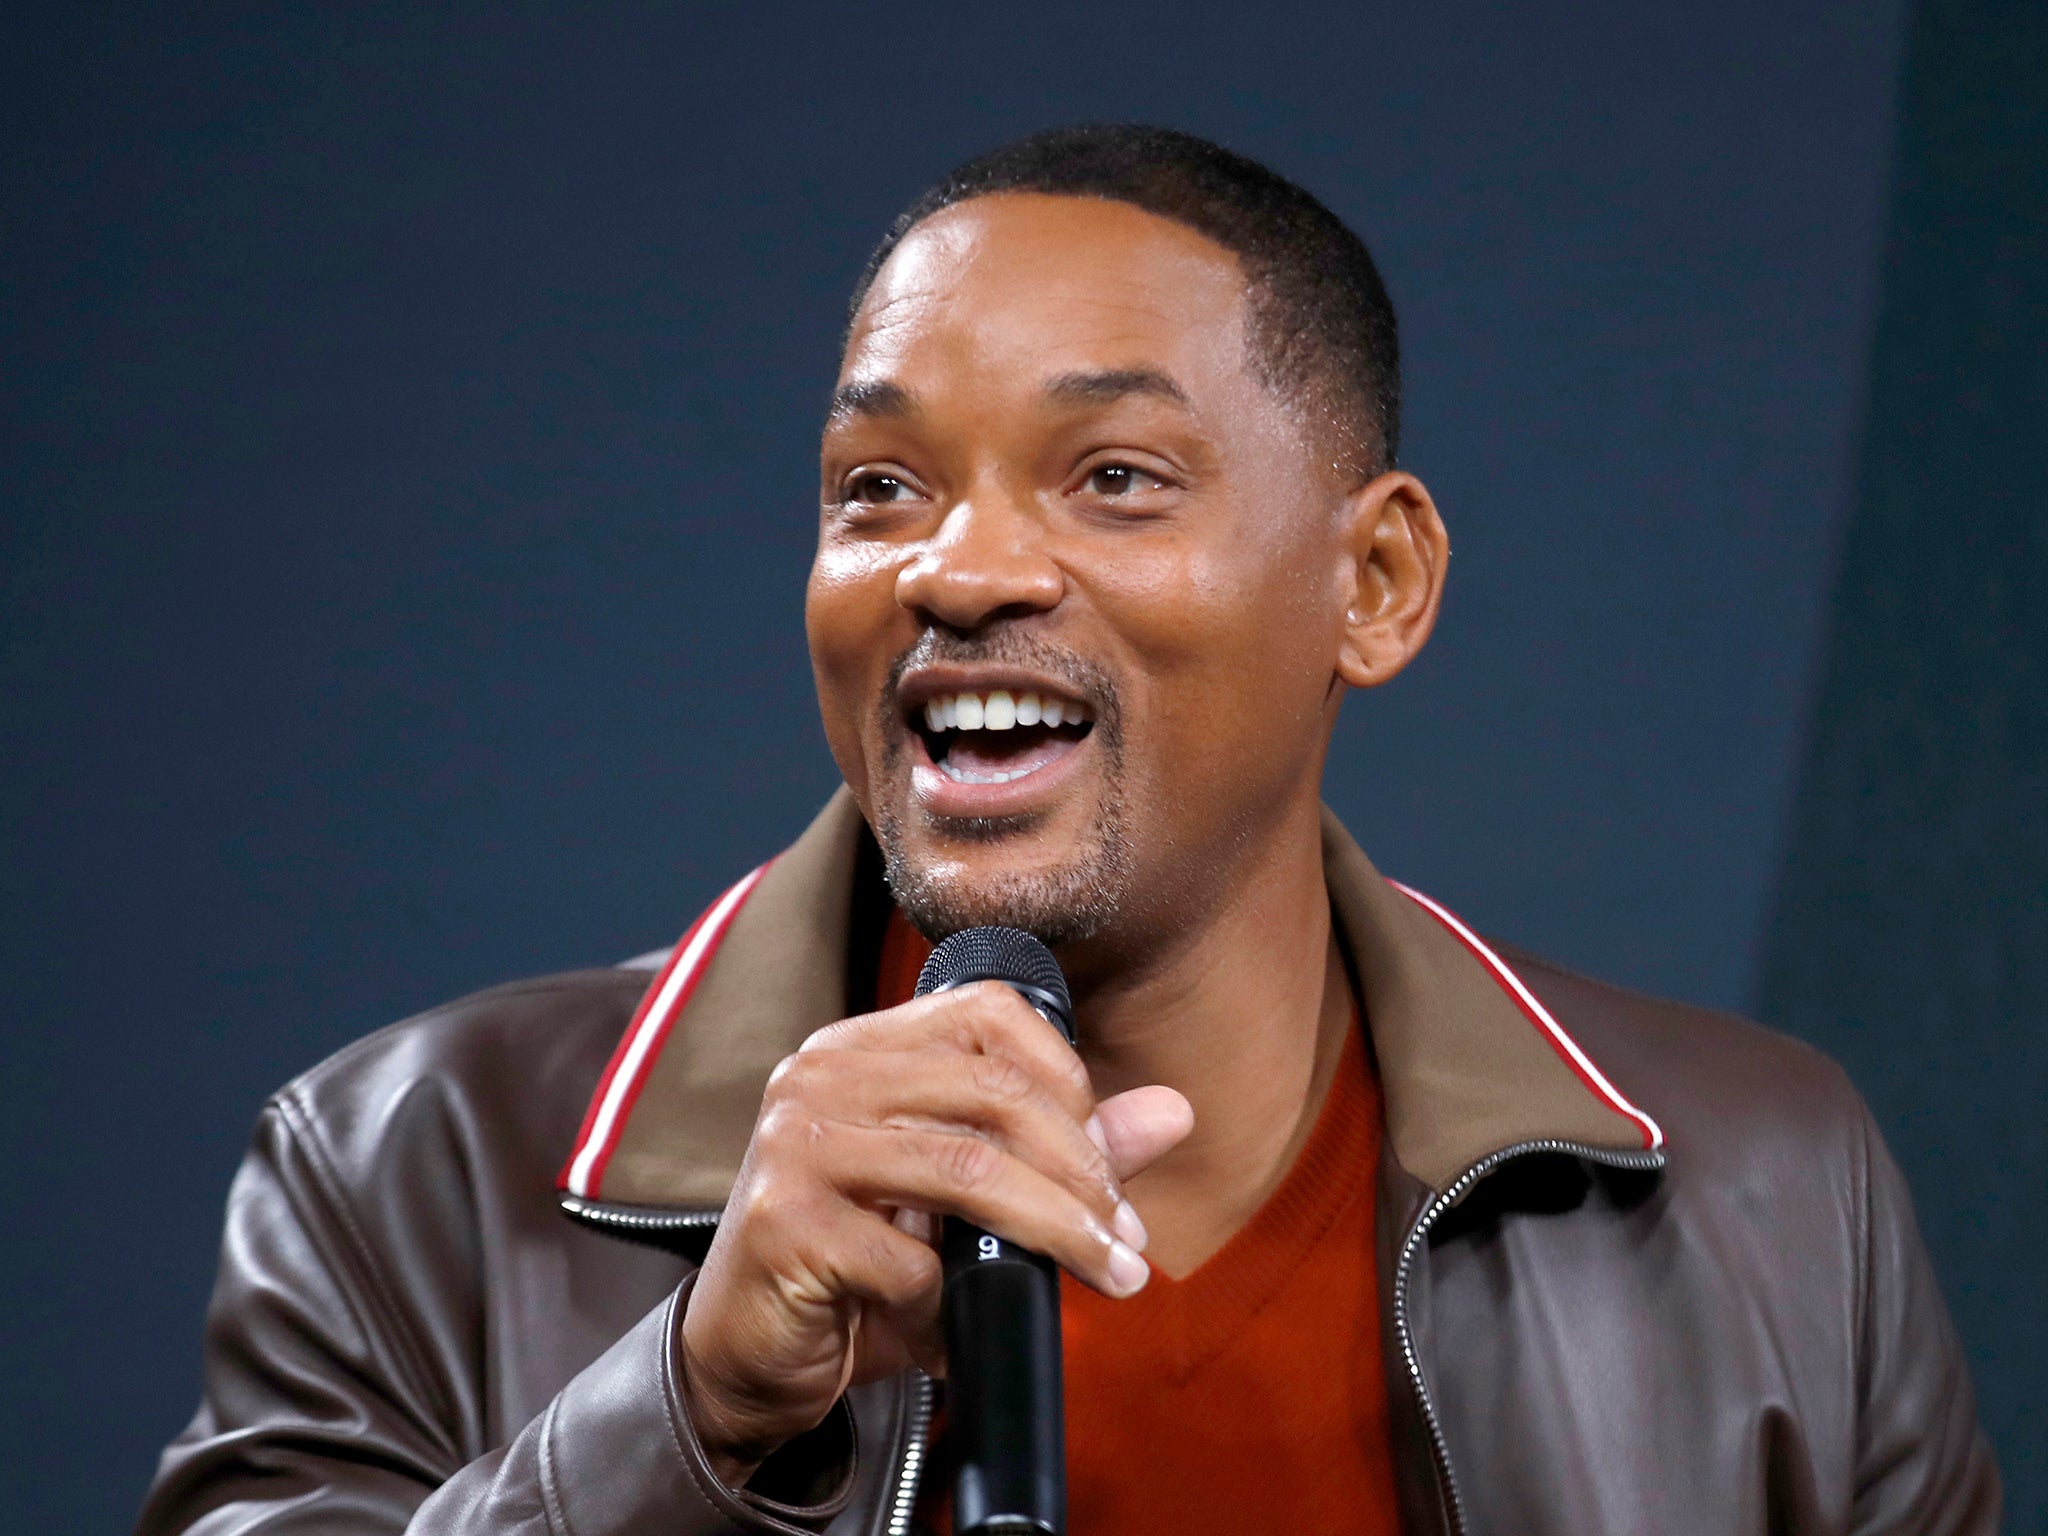 A whole lot of talking: the newly candid Will Smith in 2019